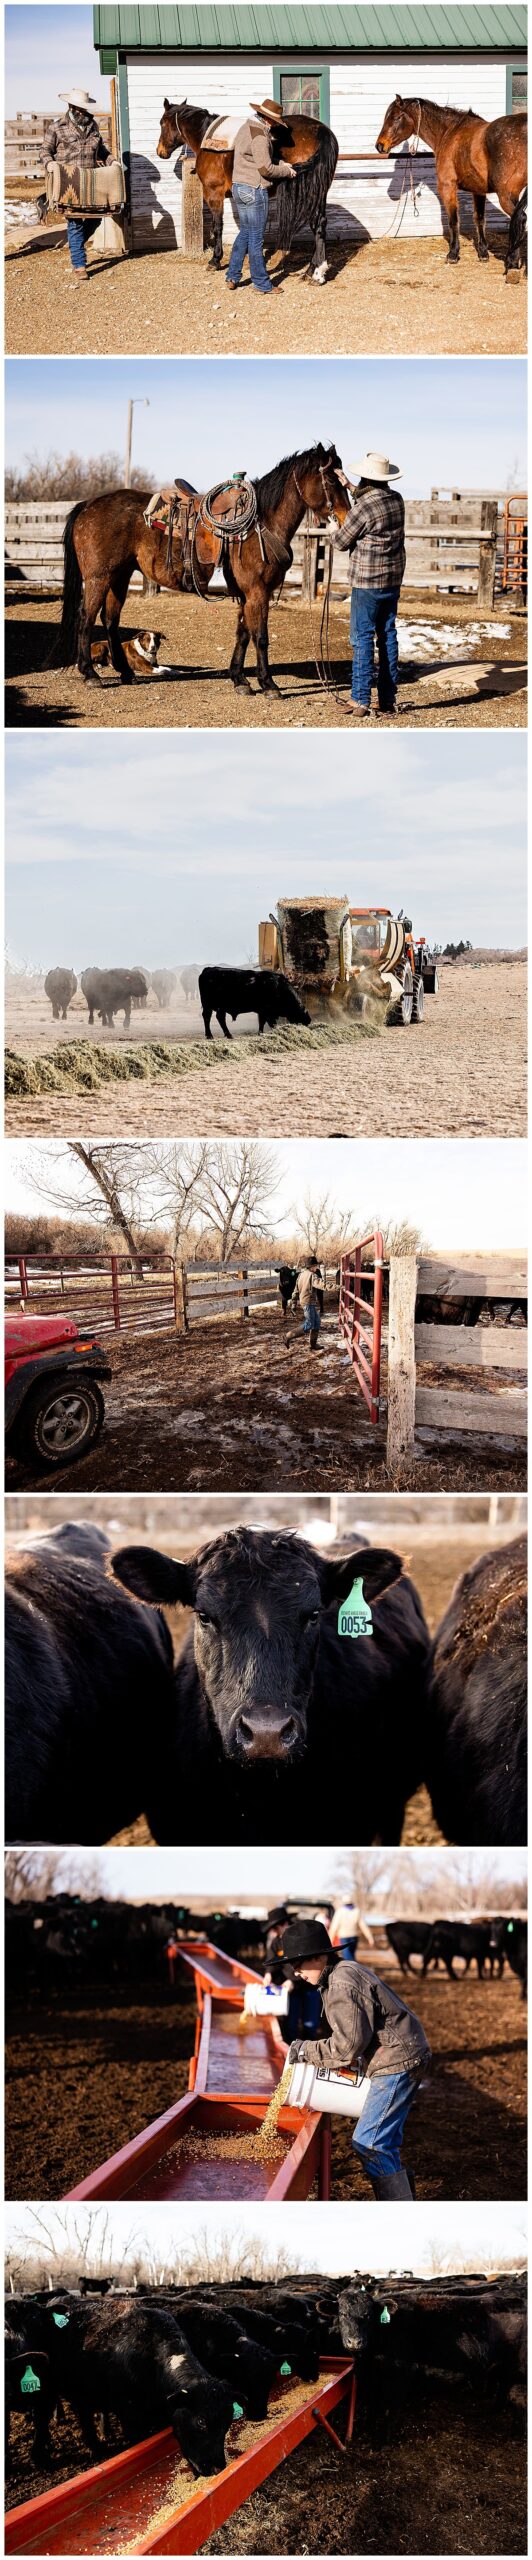 A ranch family tends to the animals in their care, dressed for the mild North Dakota weather.